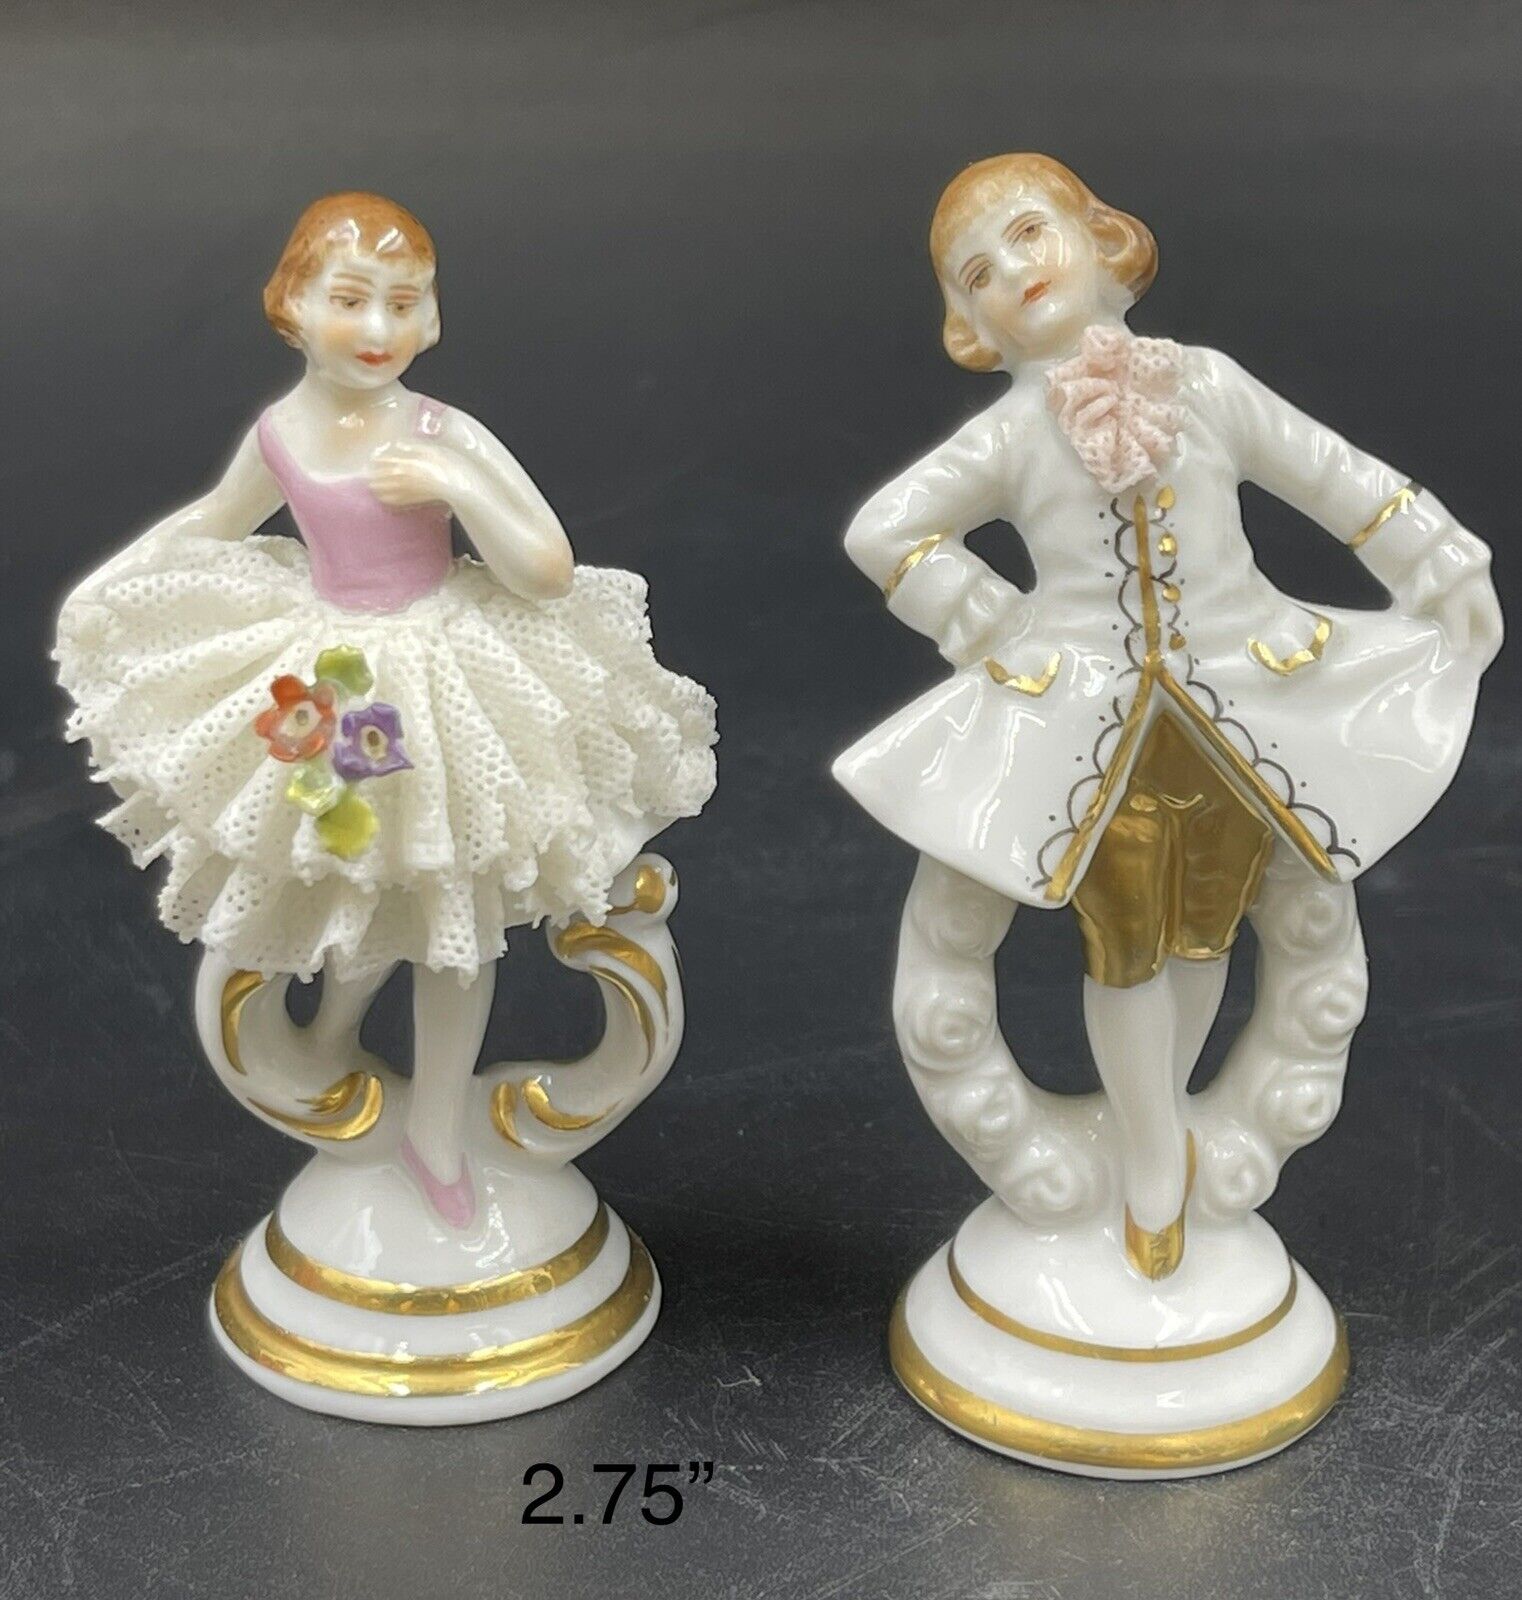 Muller Volkstedt MV German Dresden Lace Lady and Gentleman Figurines 2.75”